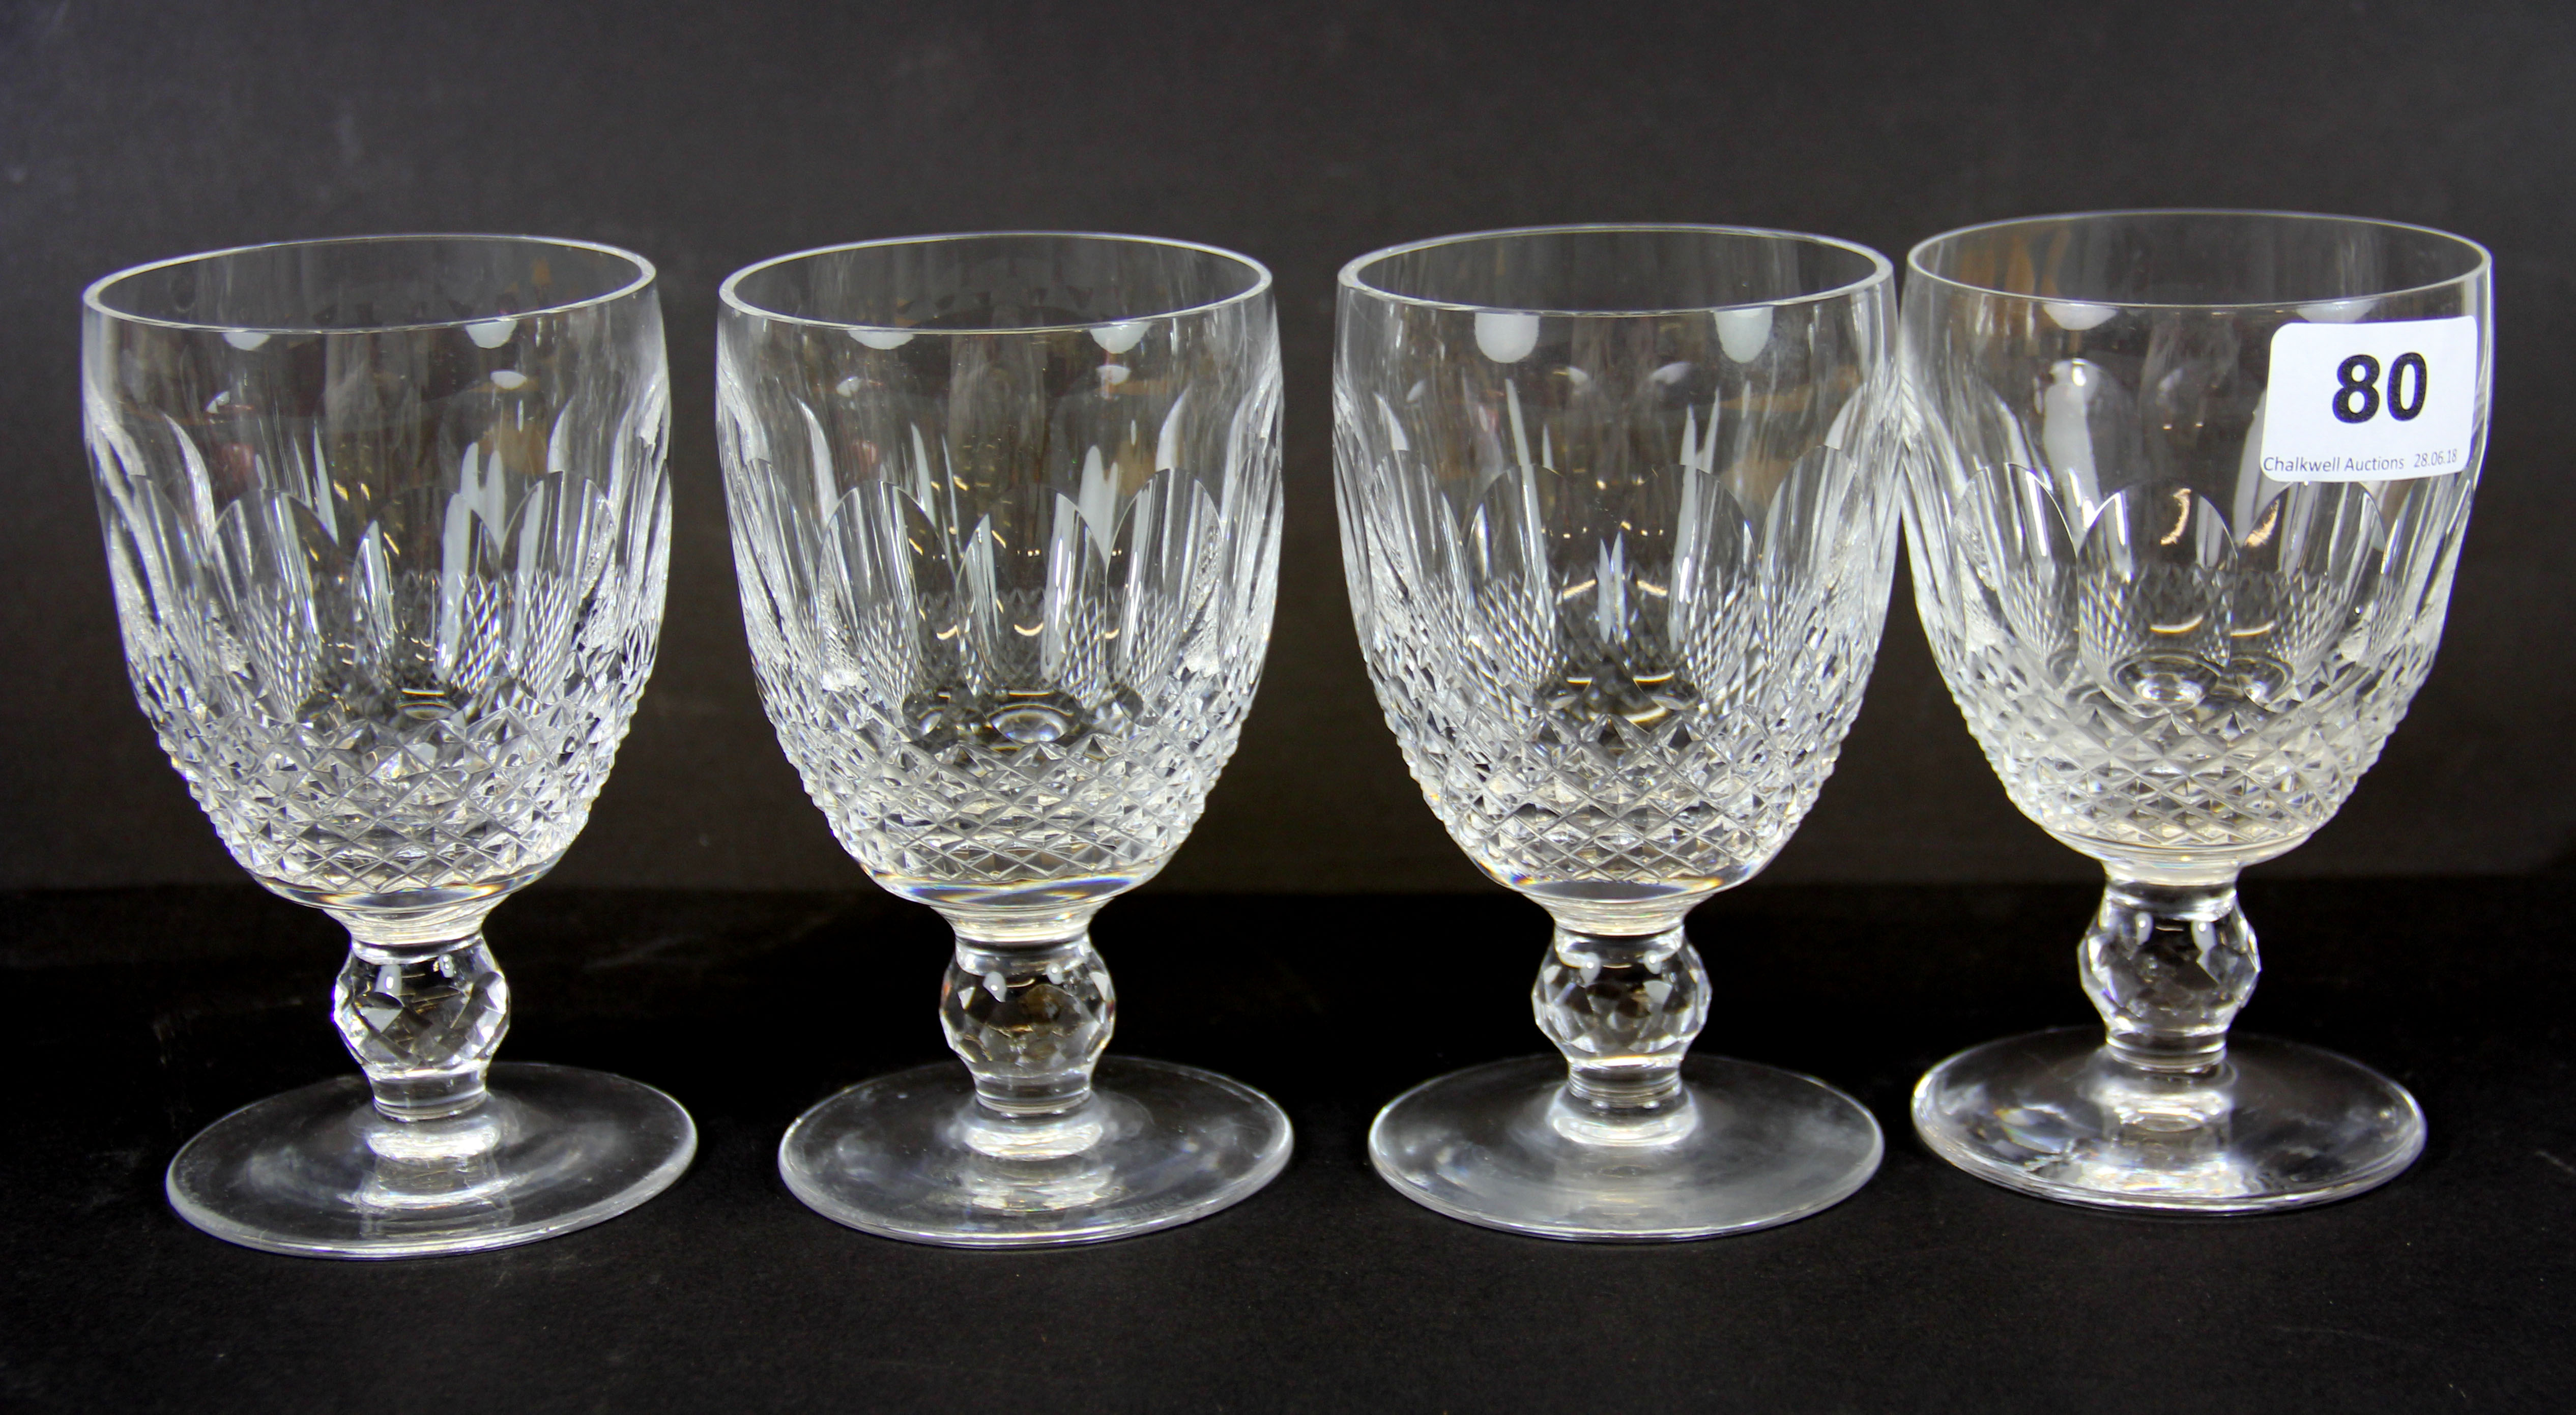 Two 1960's cases of cutlery and four cut glass Waterford wine goblets. - Image 2 of 2